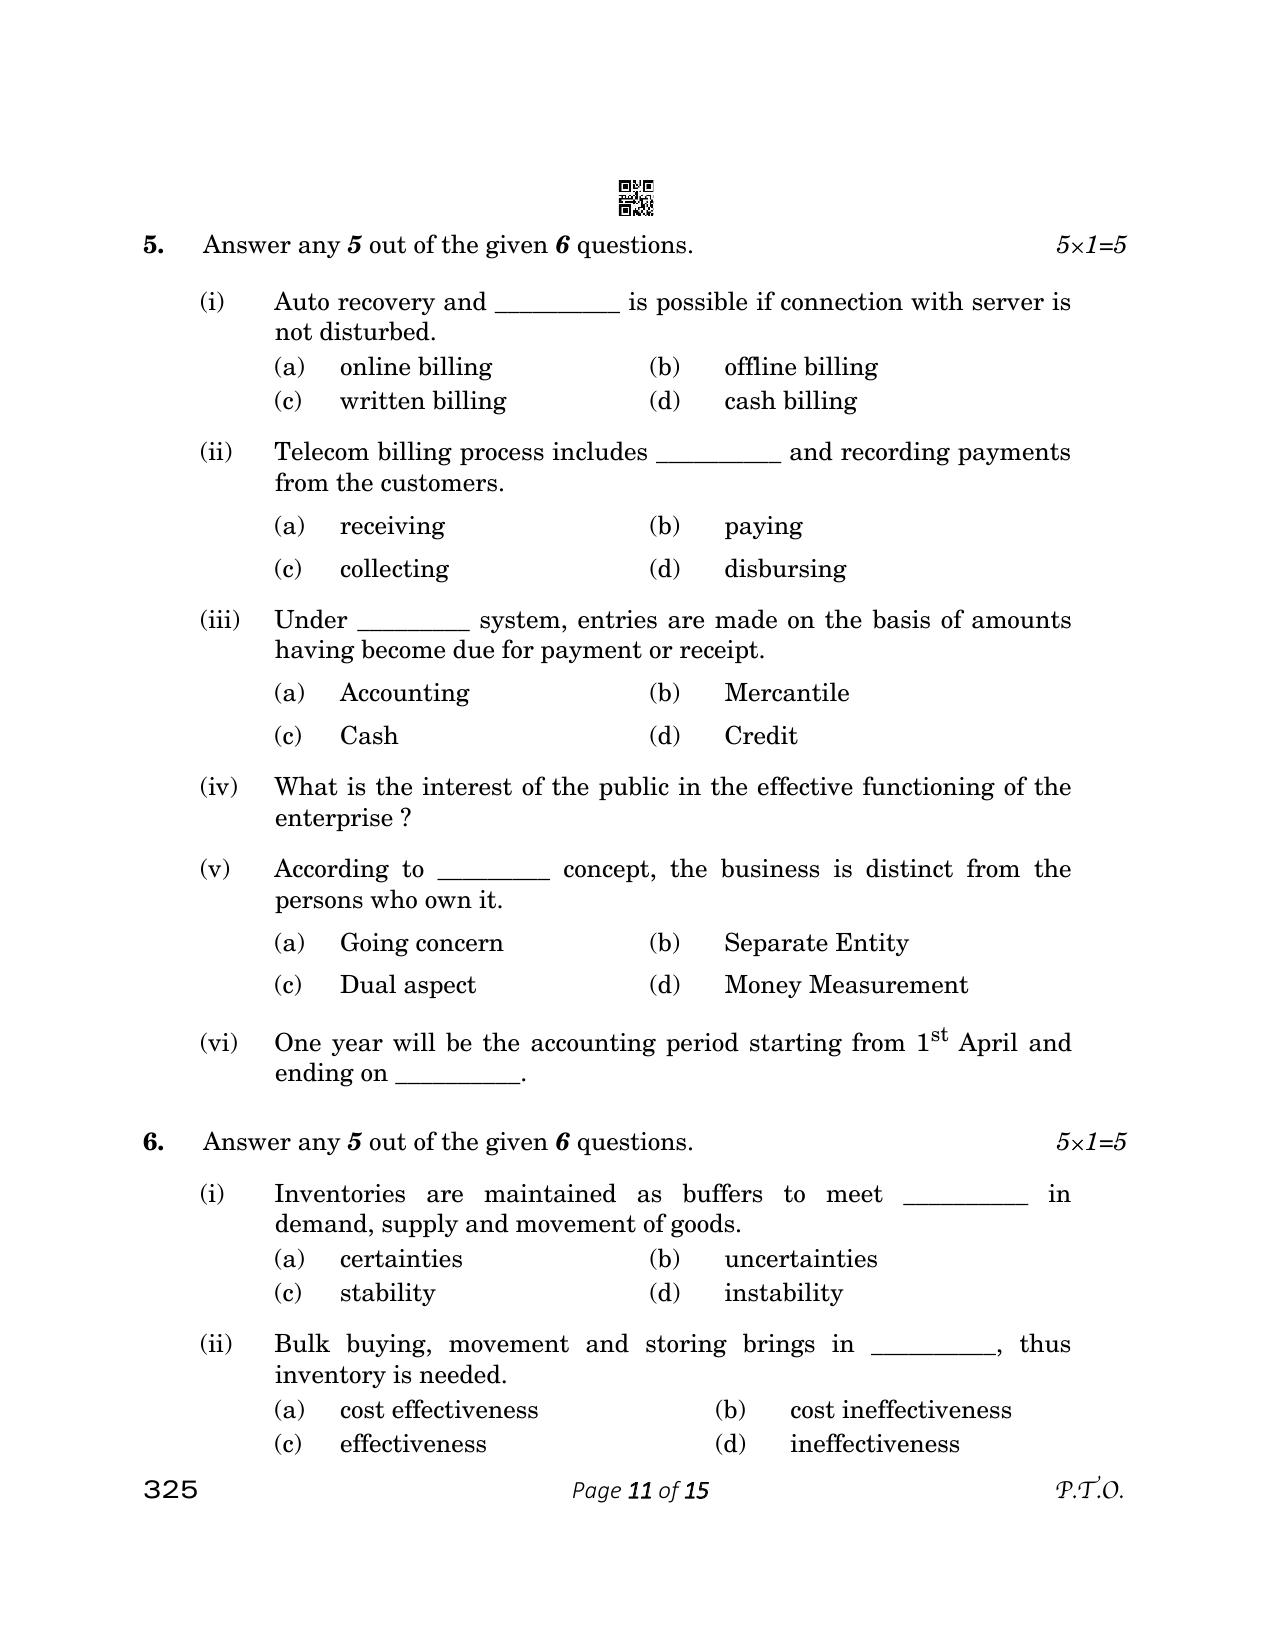 CBSE Class 12 325 Retail 2023 Question Paper - Page 11